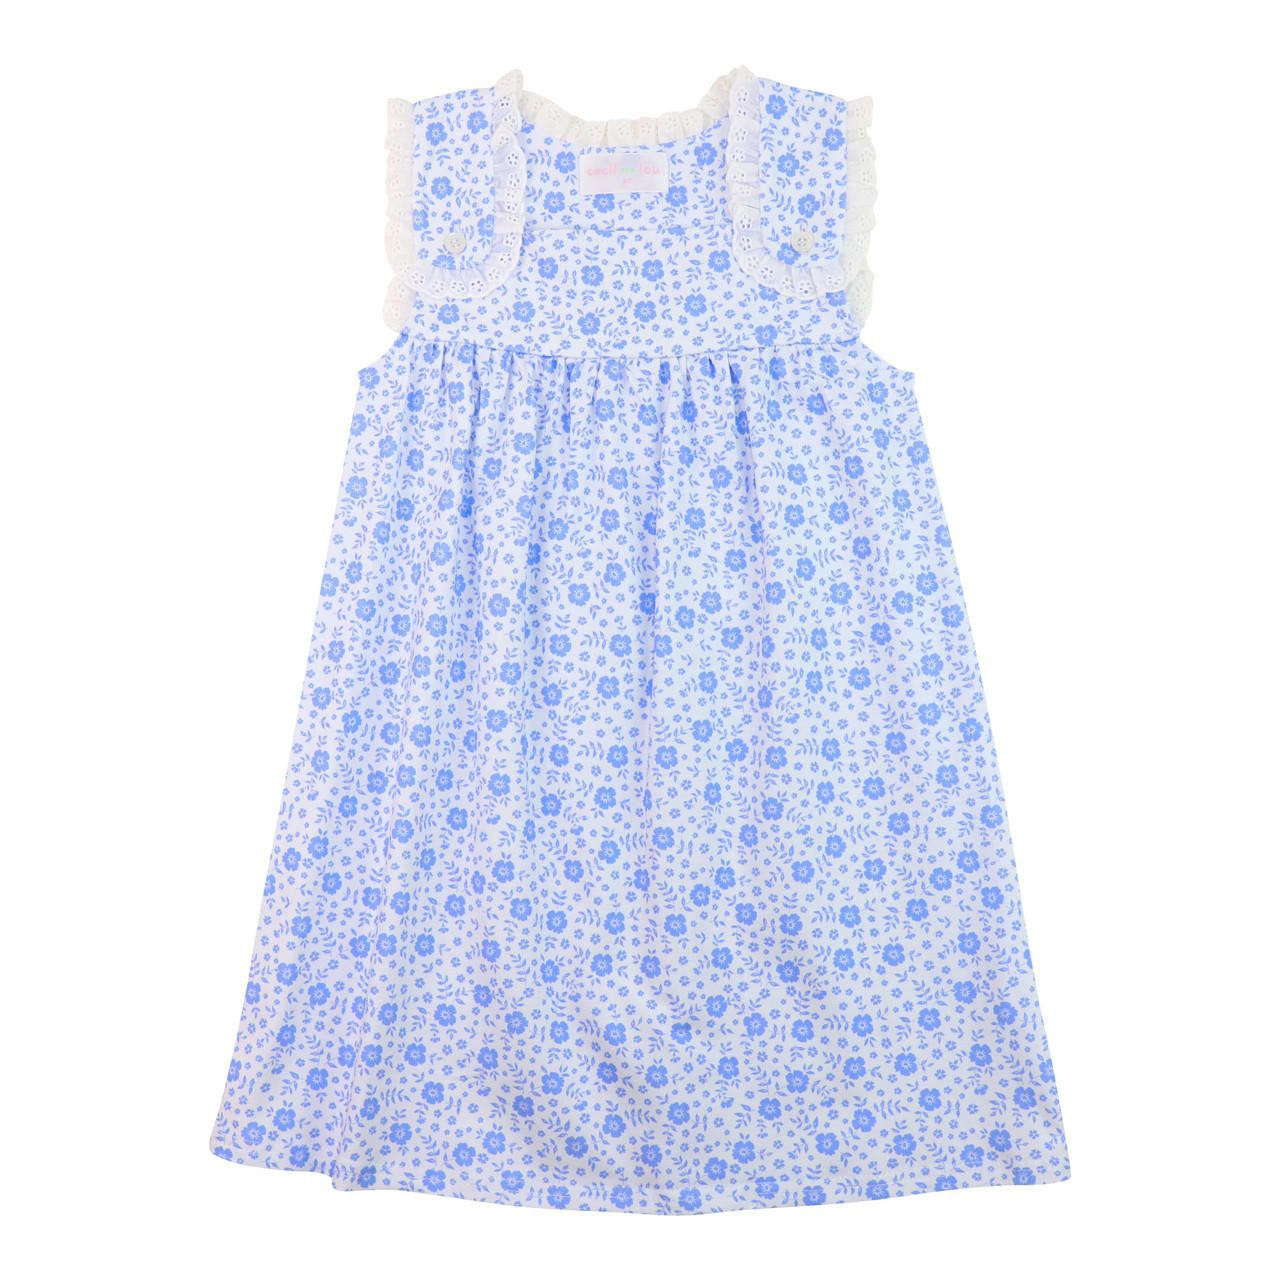 Blue Knit Floral Eyelet Dress - Cecil and Lou